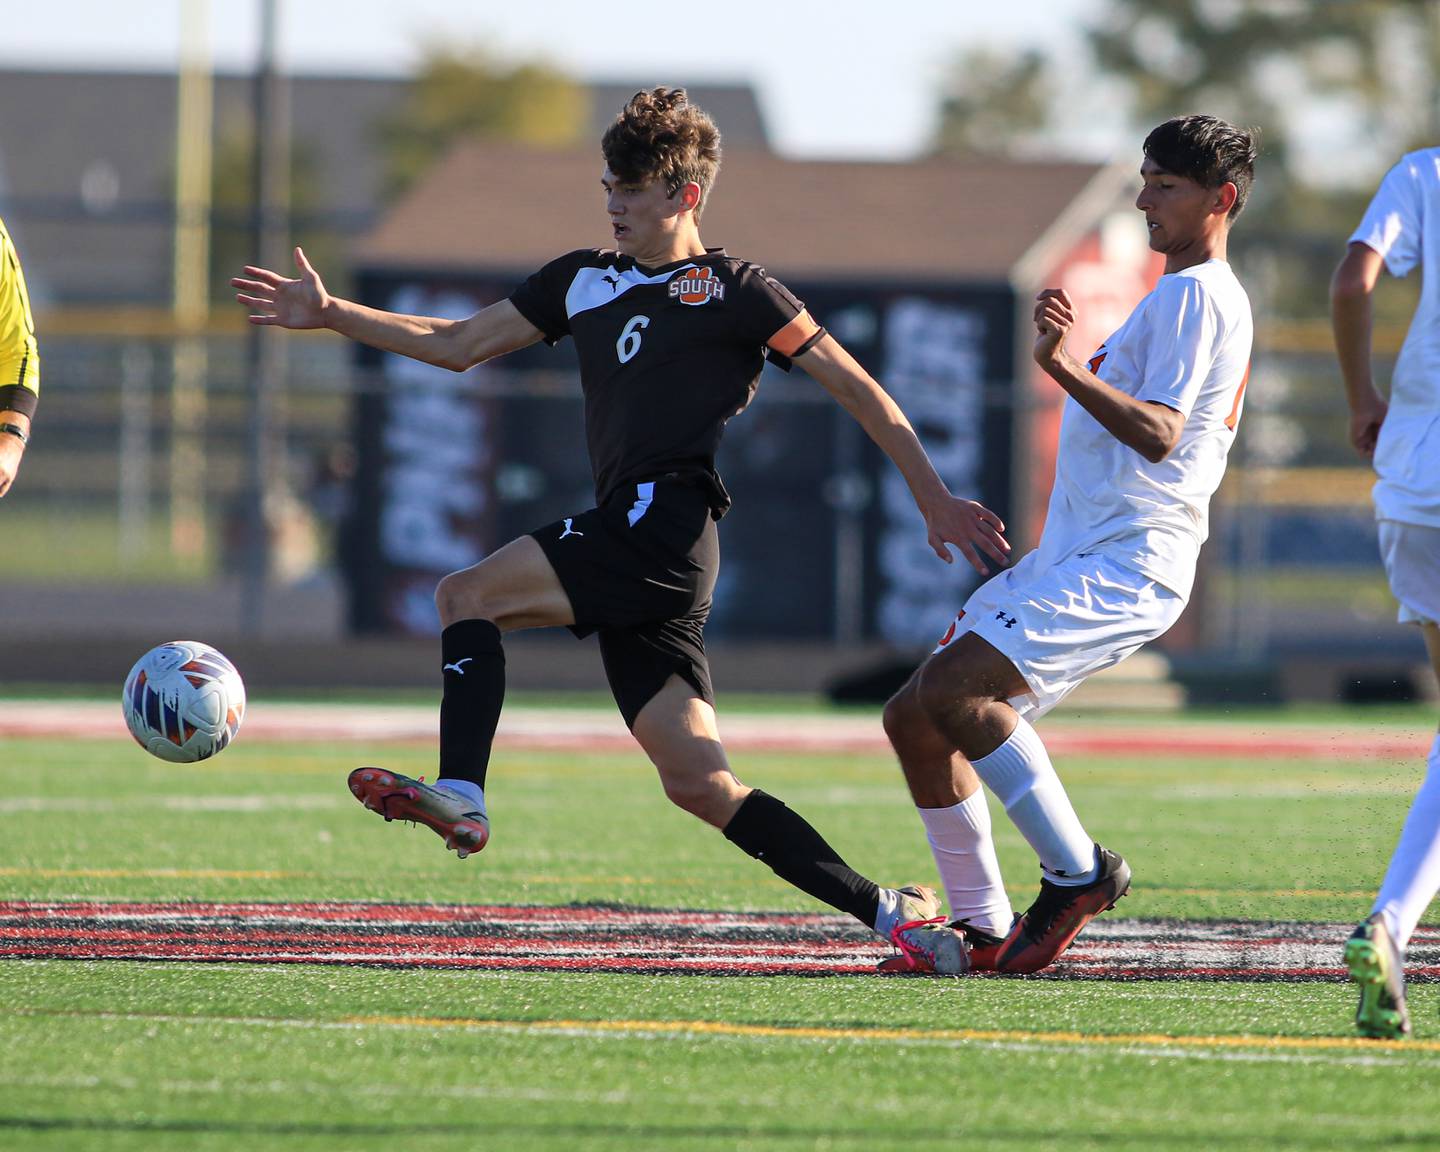 Wheaton Warrenville South's Chase Kedzior (6) eludes the defense during the Class 3A Plainfield North Regional final game between Oswego and Wheaton Warrenville South. Oct 22, 2022